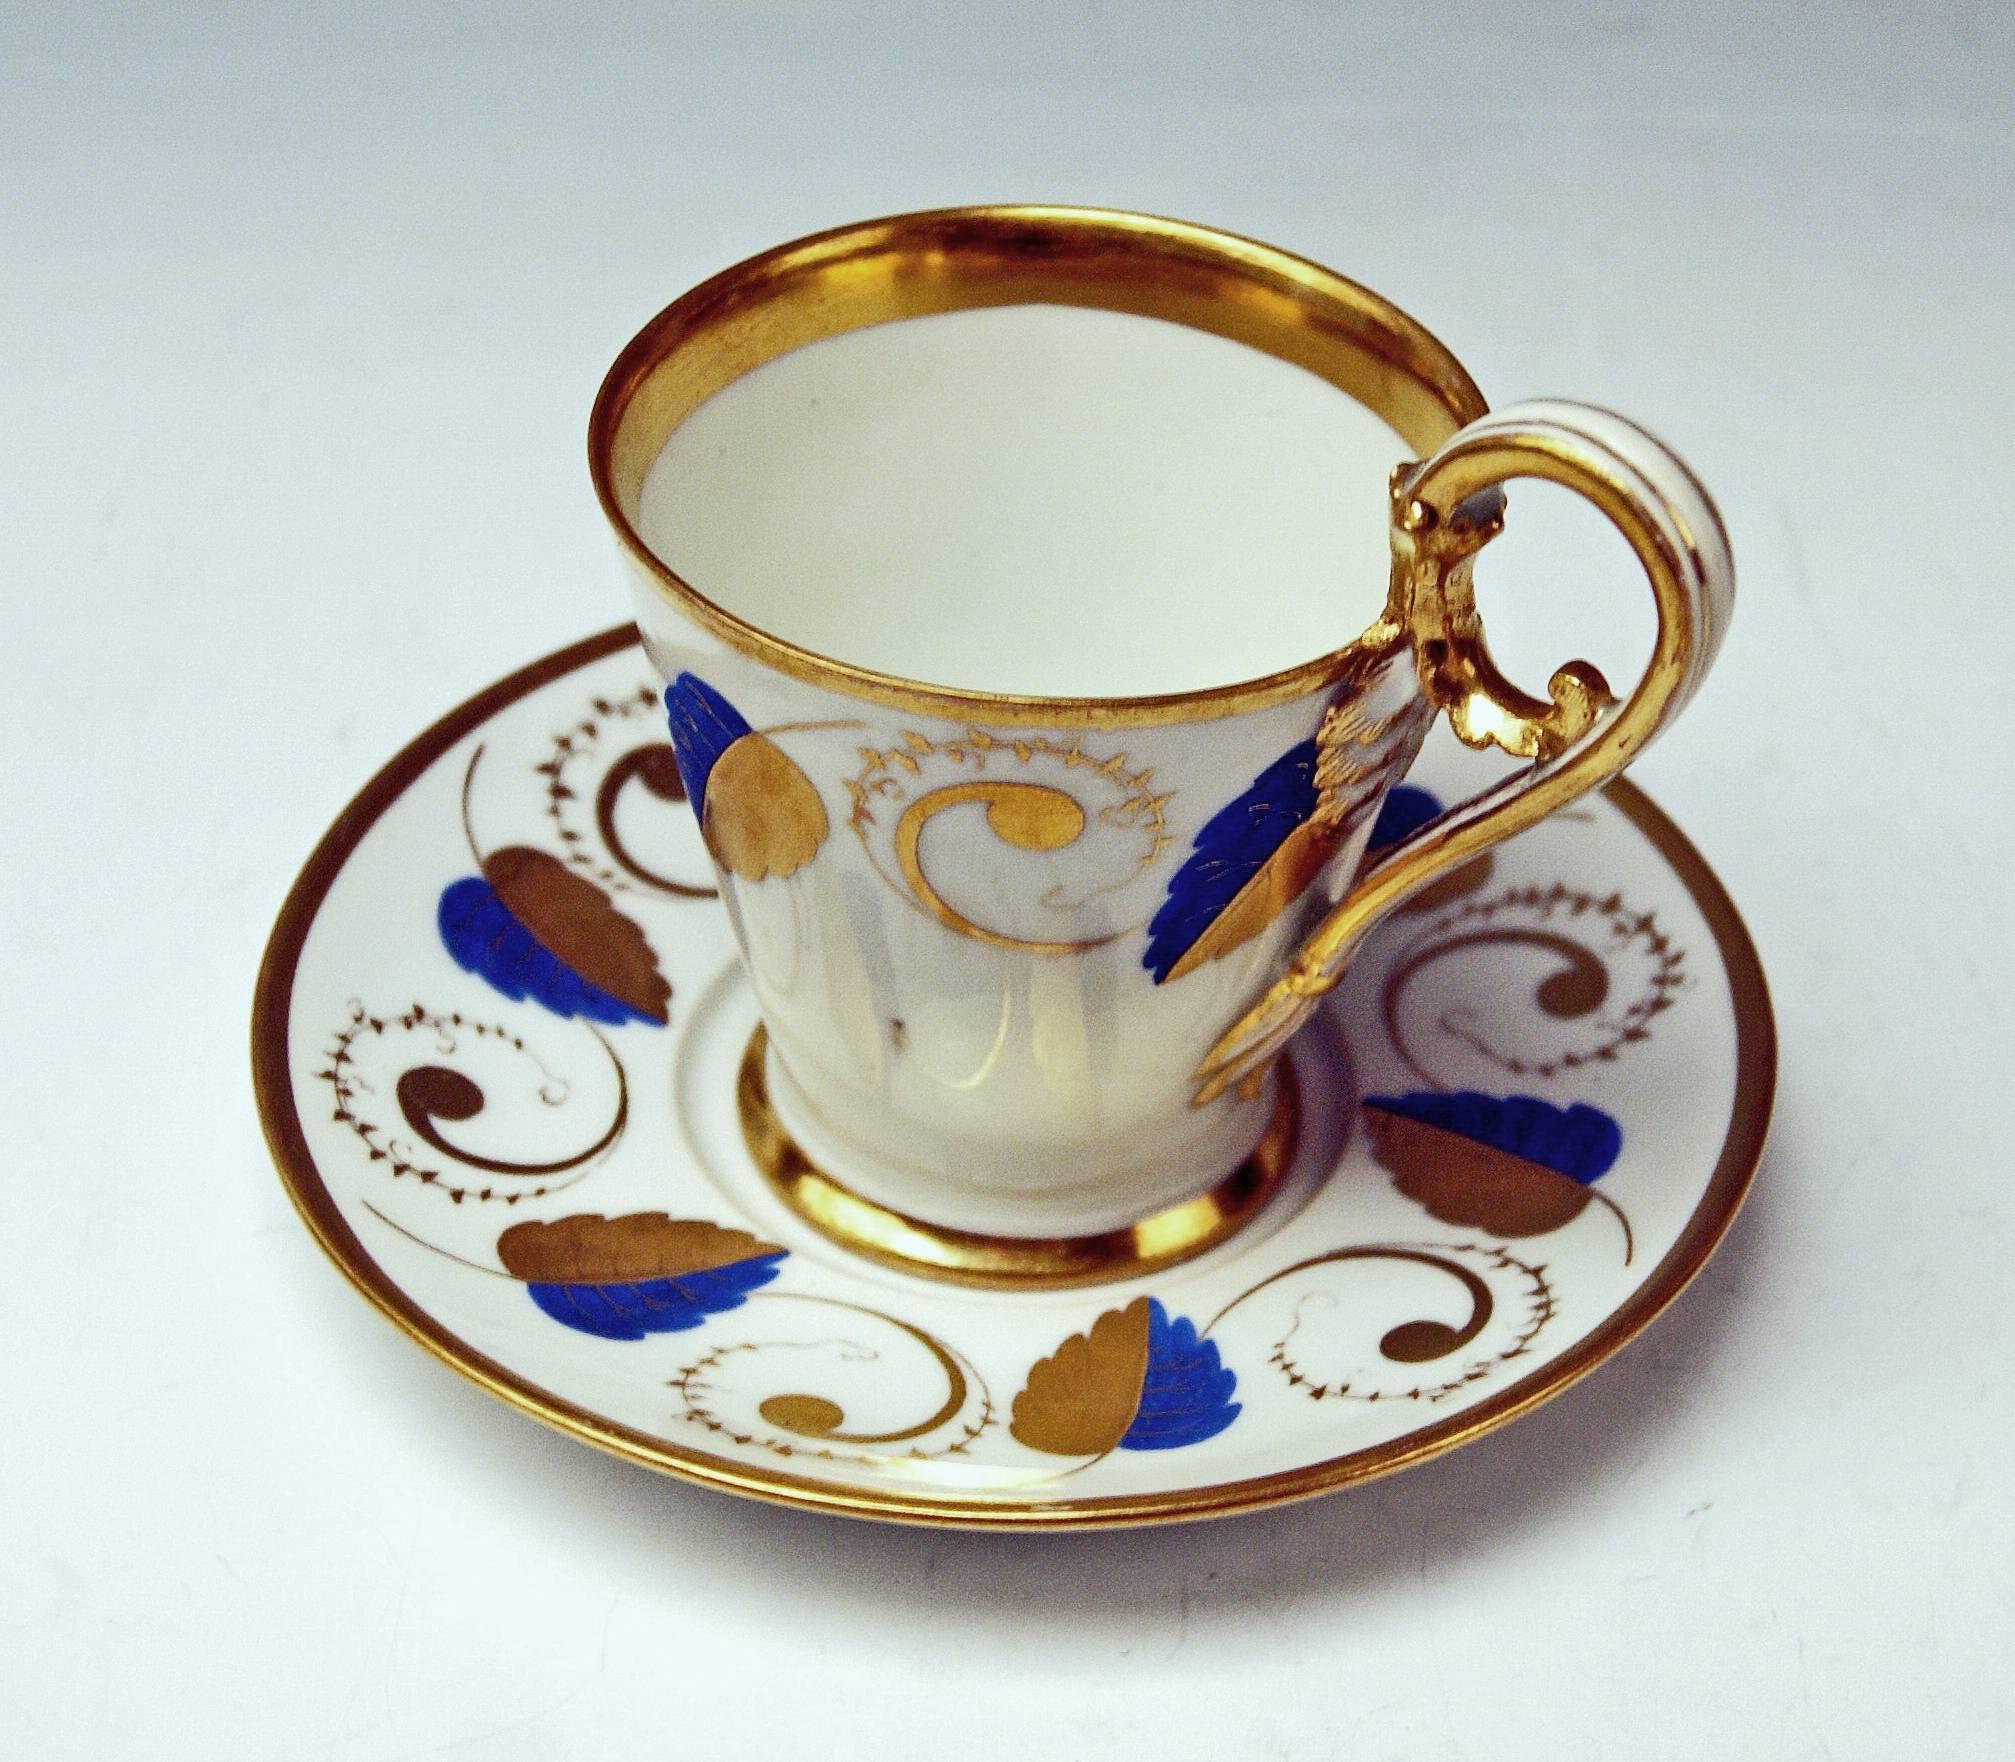 Glazed Vienna Imperial Porcelain Cup Saucer Golden Blue Ornaments with Leaves 1812